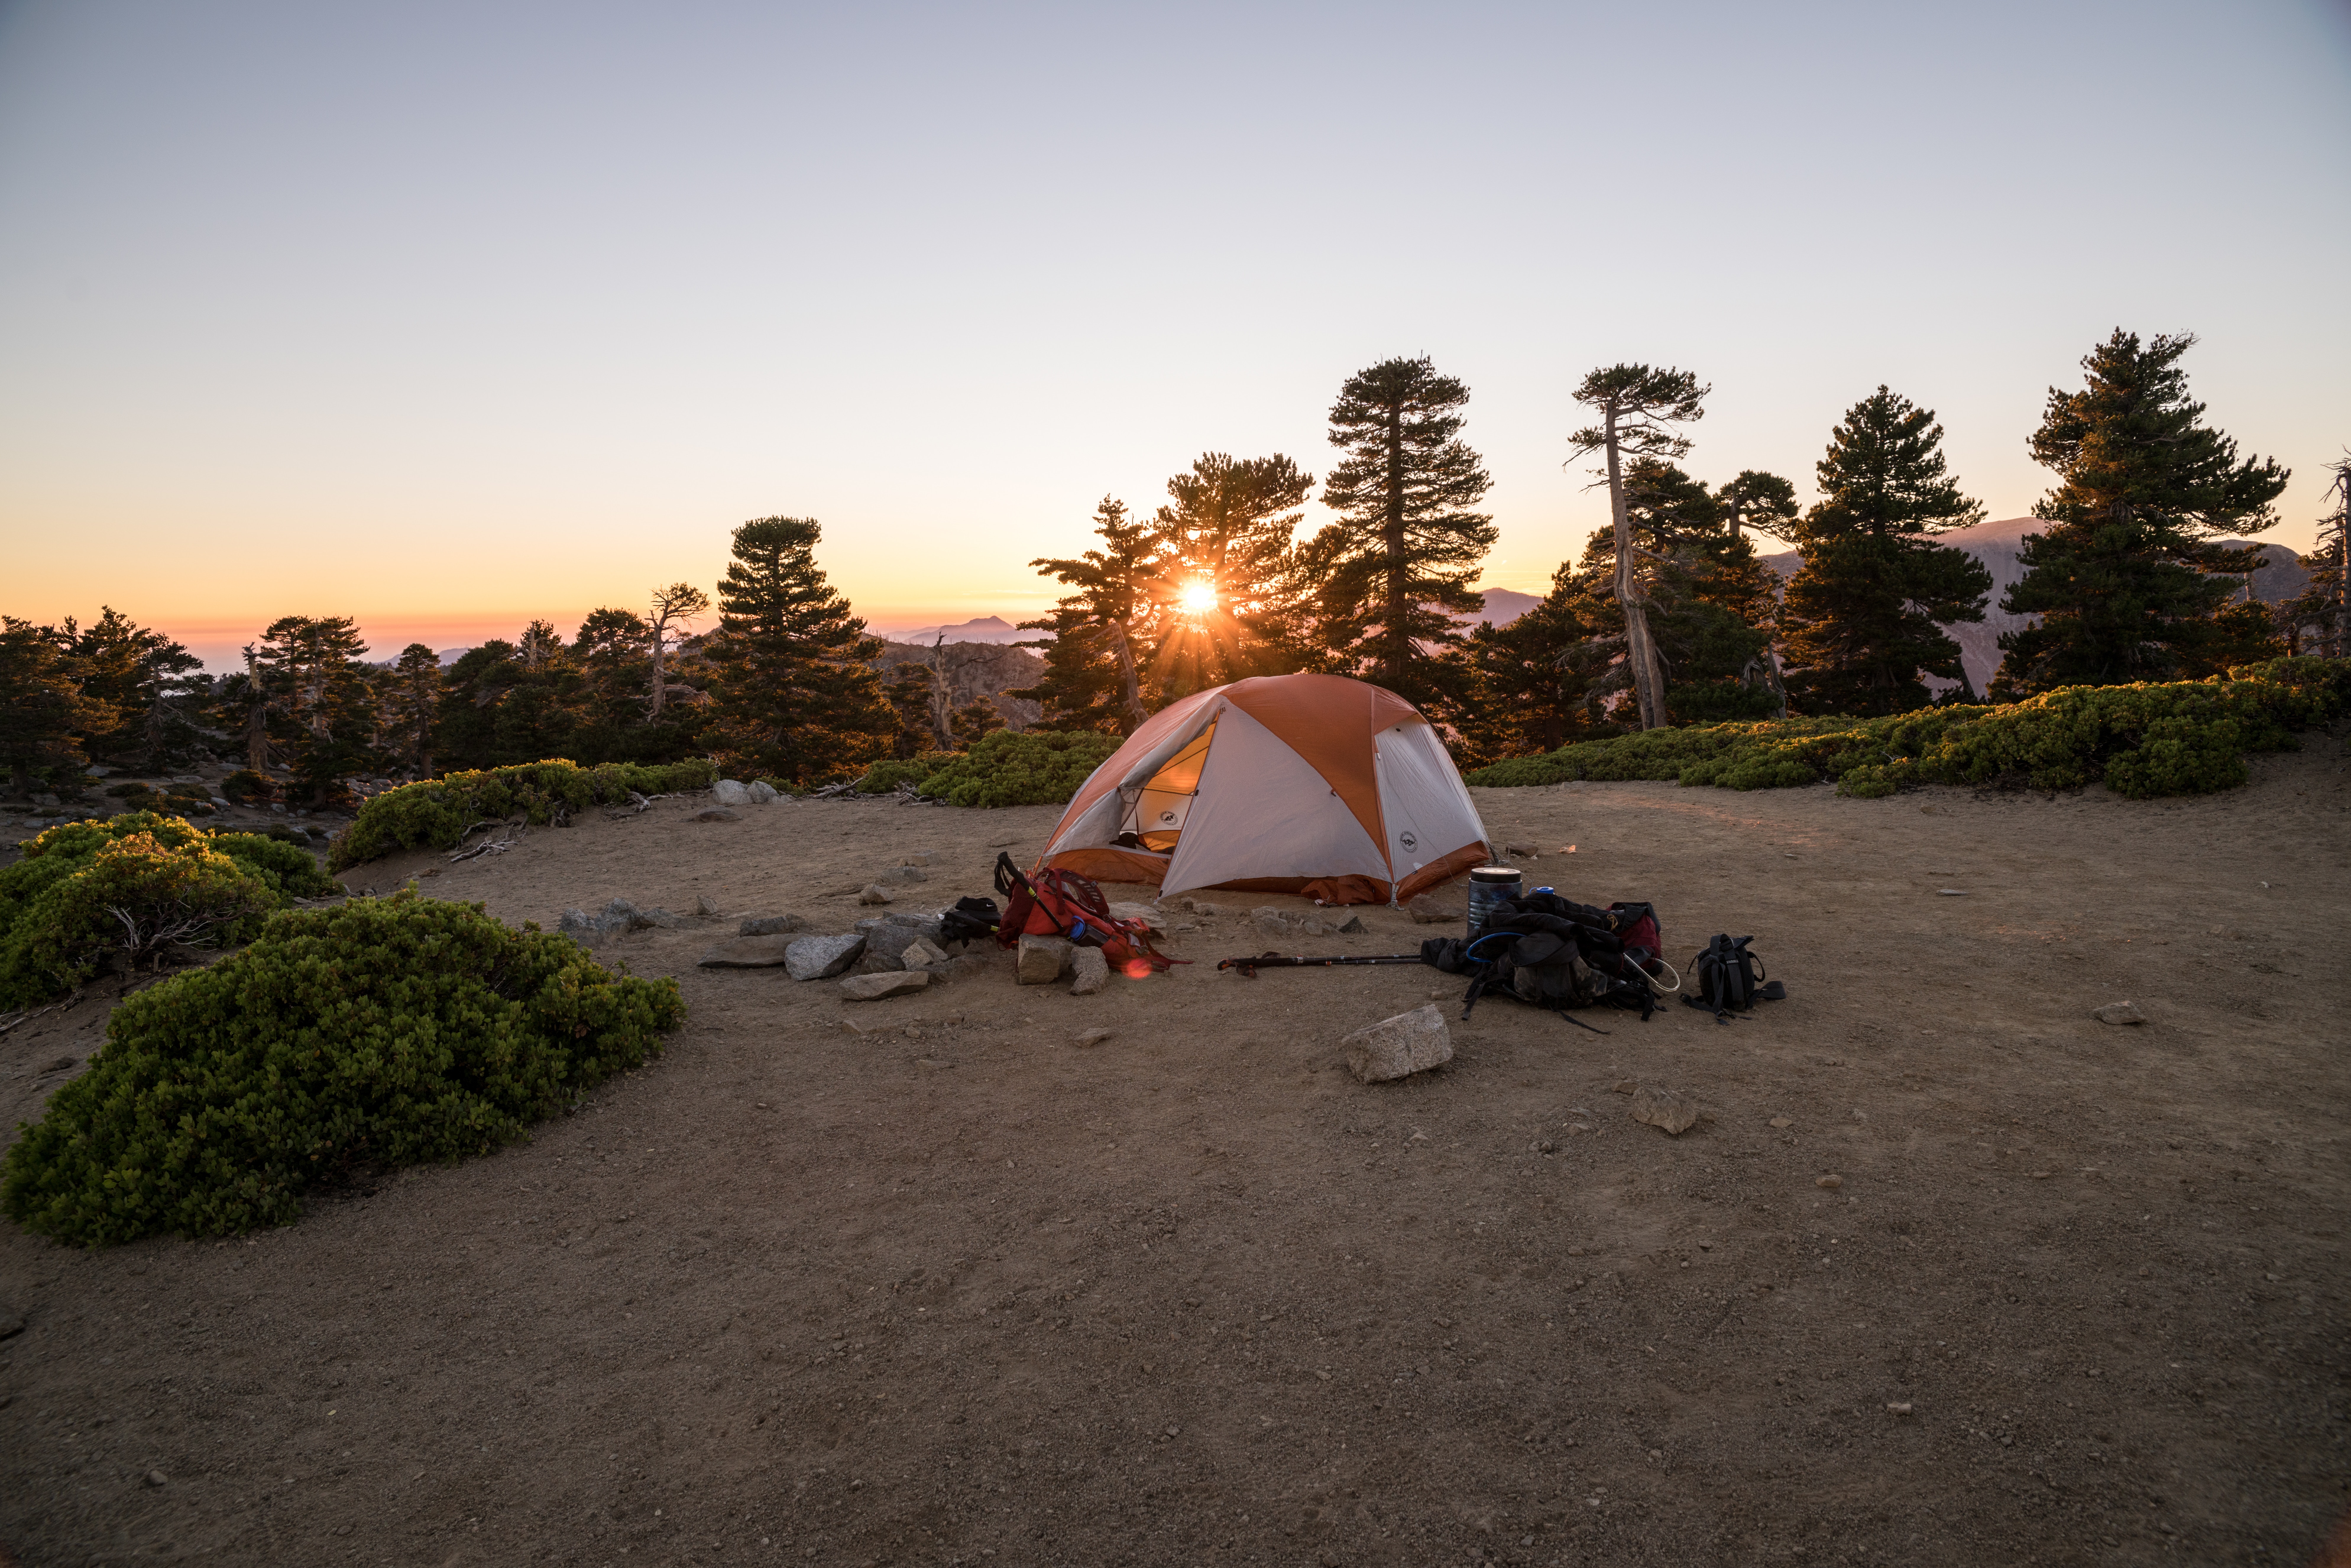 Top 10 tips for first-time campers